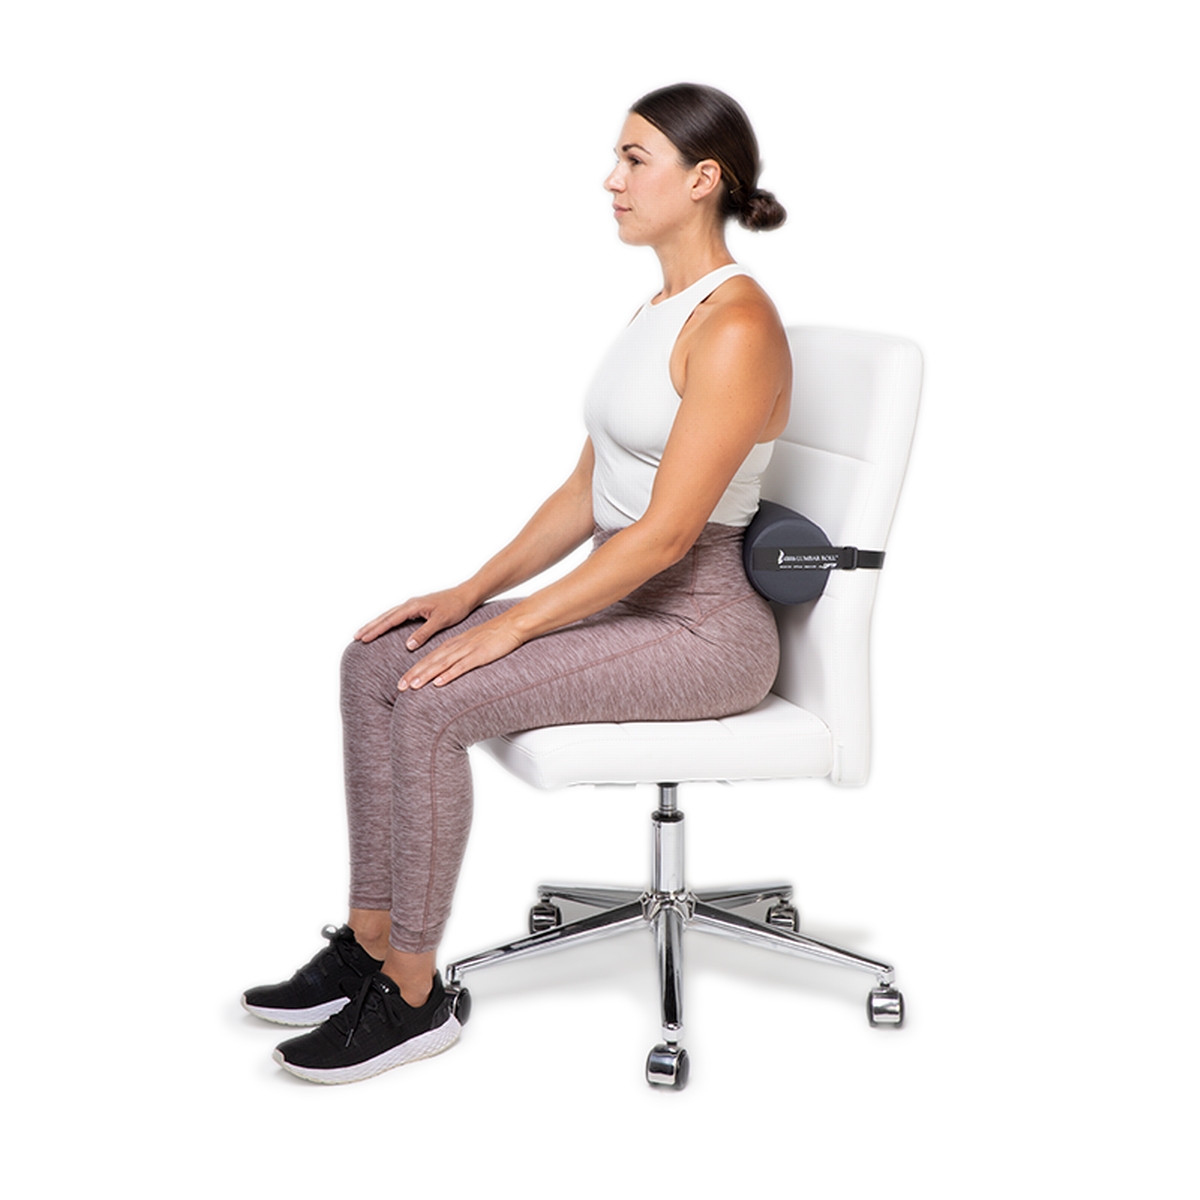 Wish Customer Reviews: The Original McKenzie Lumbar Roll Memory Cotton  Waist Back Pillow Support for Office Chairs and Car Seats